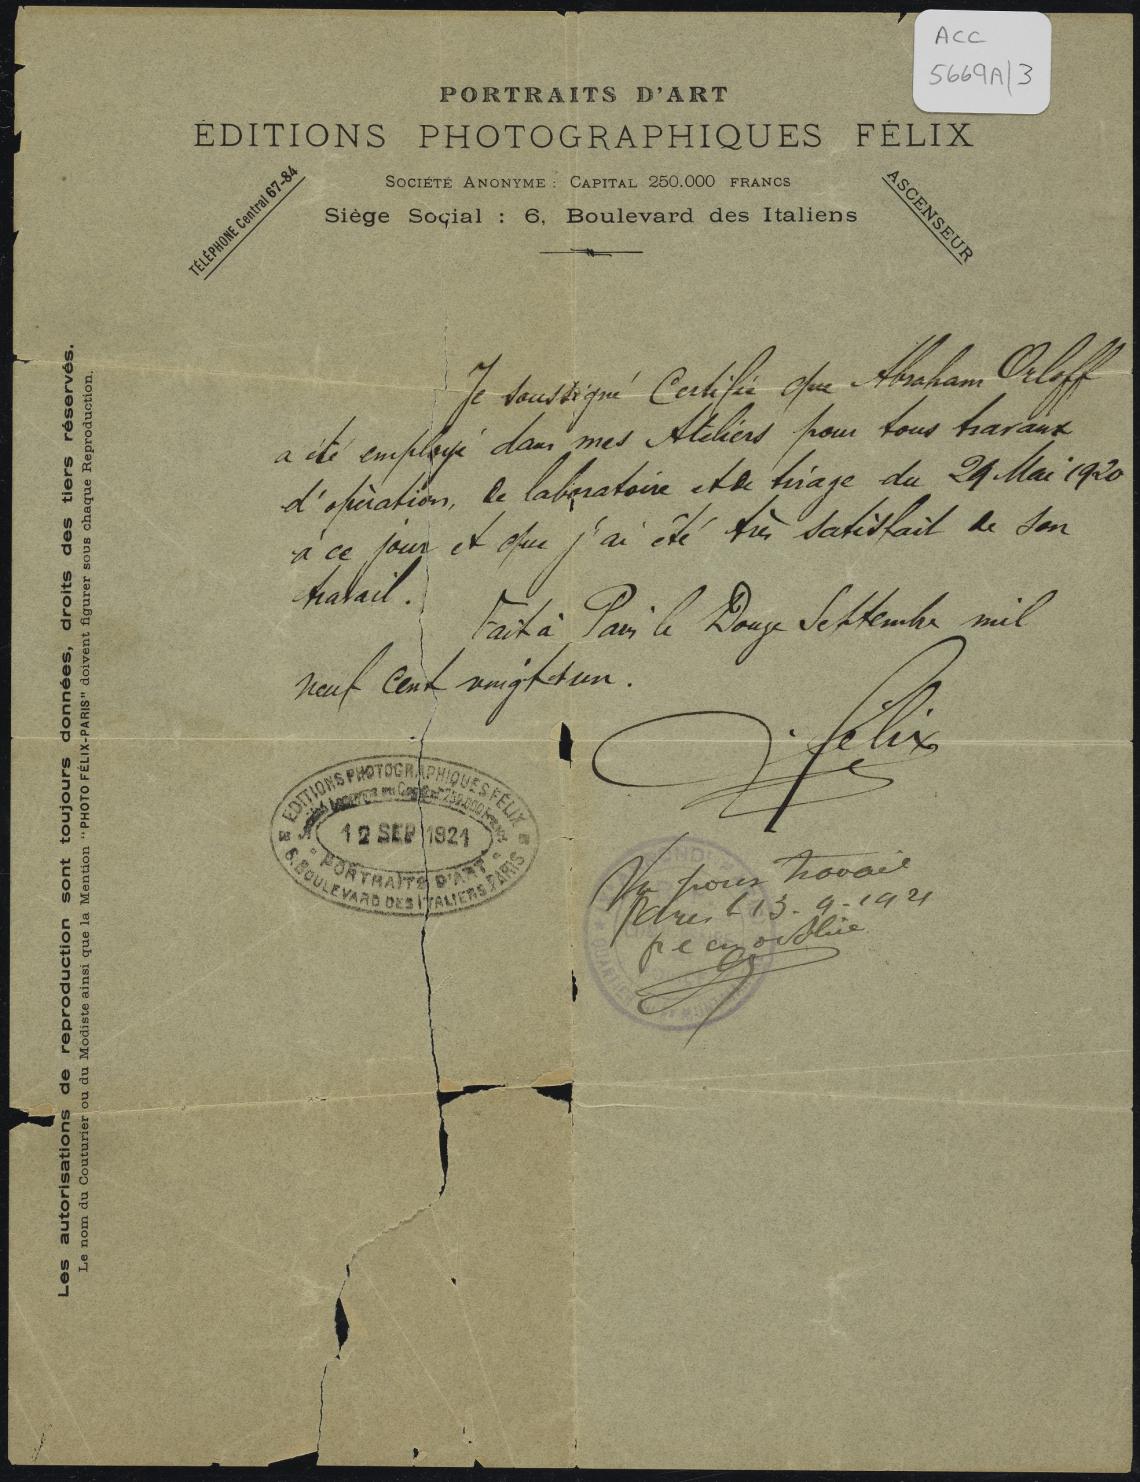 Reference letter from Editions Photographiques Felix Paris 13 September 1921